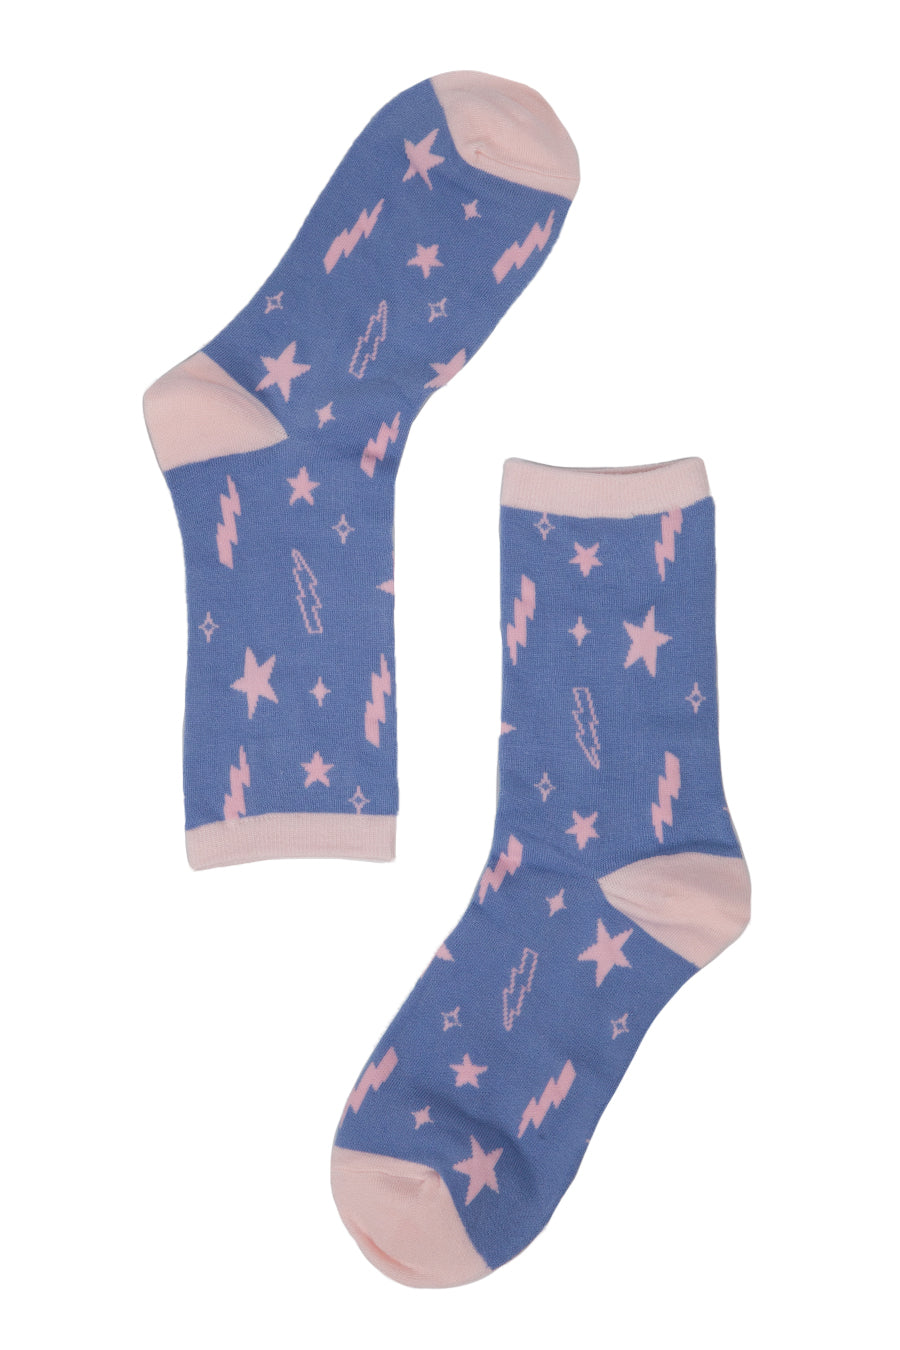 lilac, pink bamboo socks with scattered stars and thunder bolts